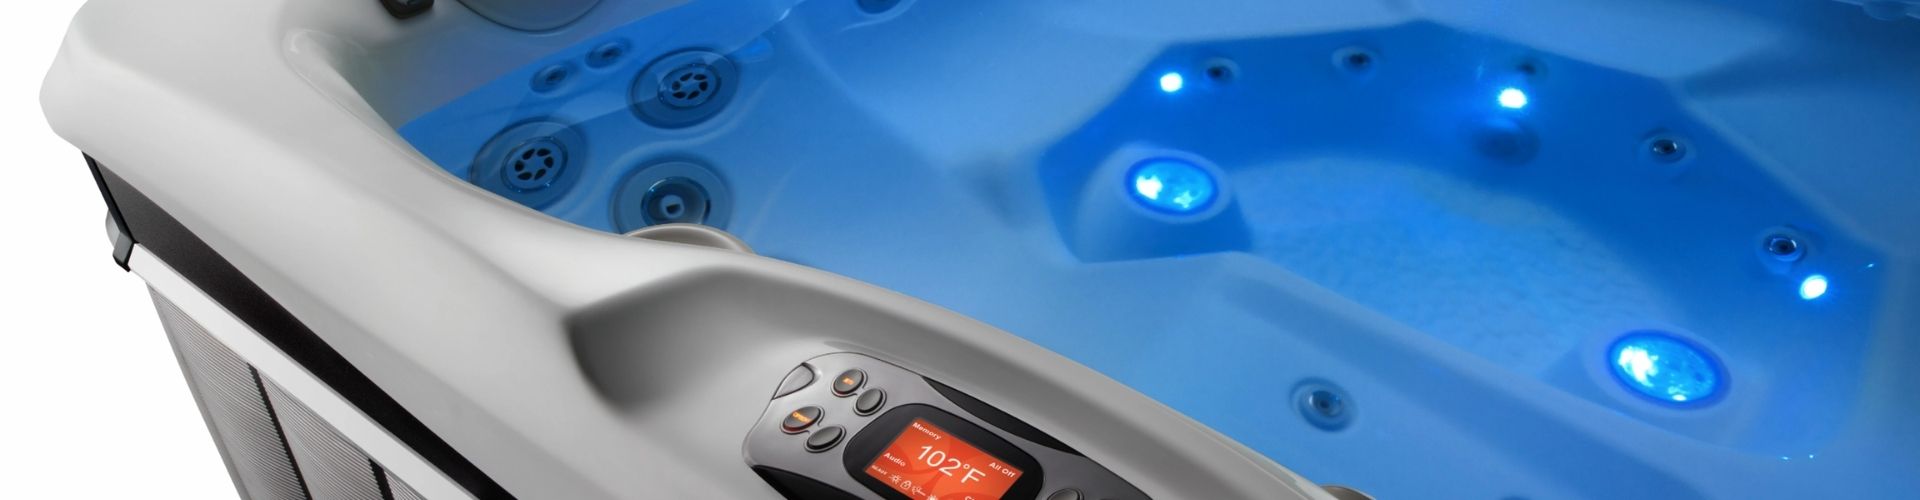 What the Latest High-Tech, Smart Hot Tubs Offer